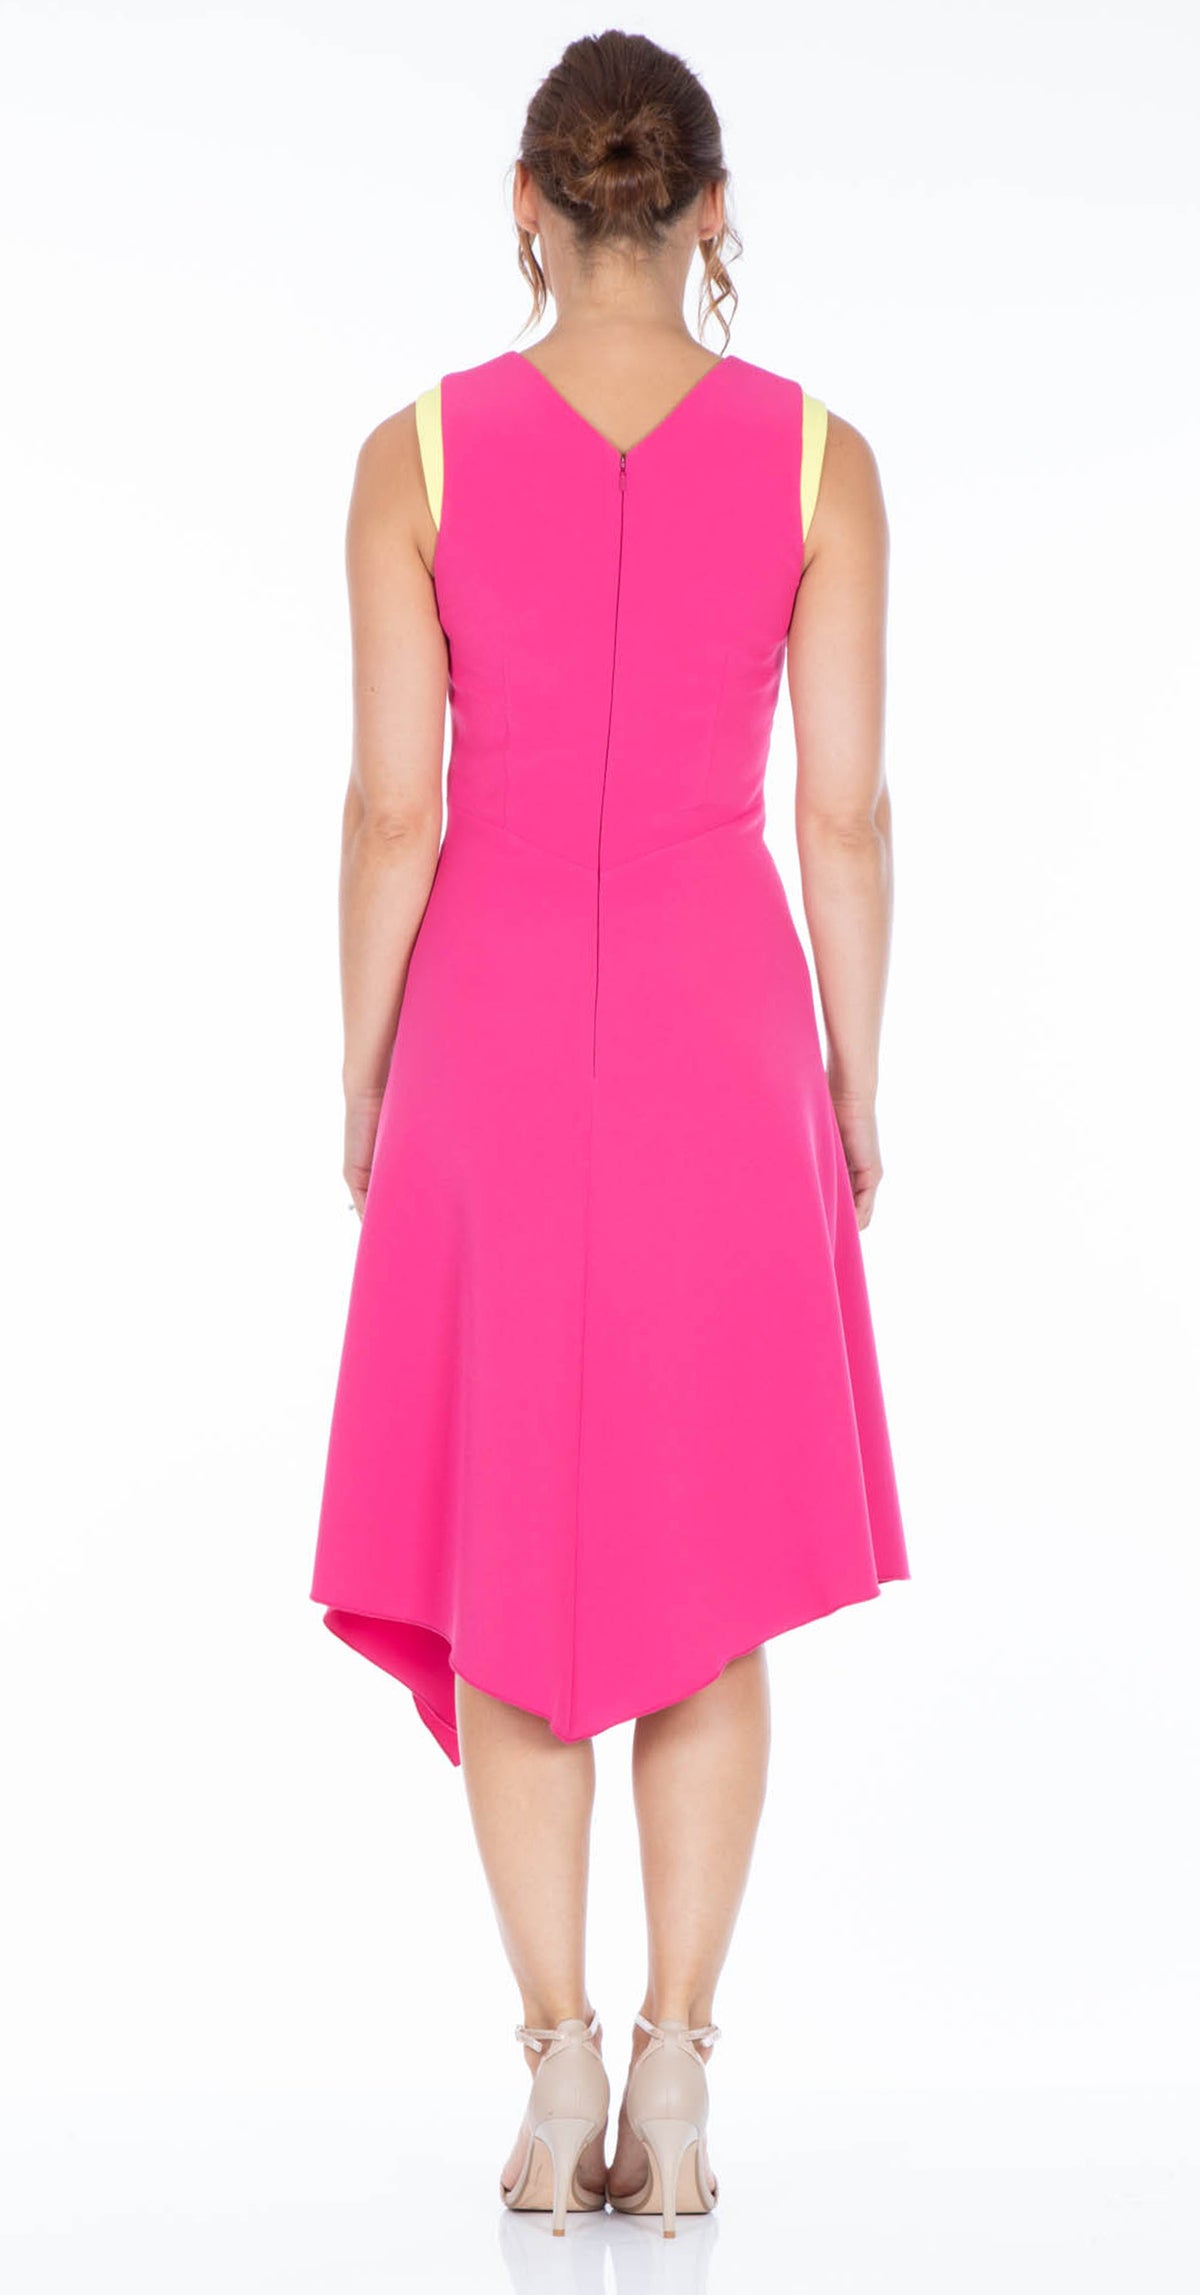 Adelle Dress DRC236 Pink crepe with yellow contrast